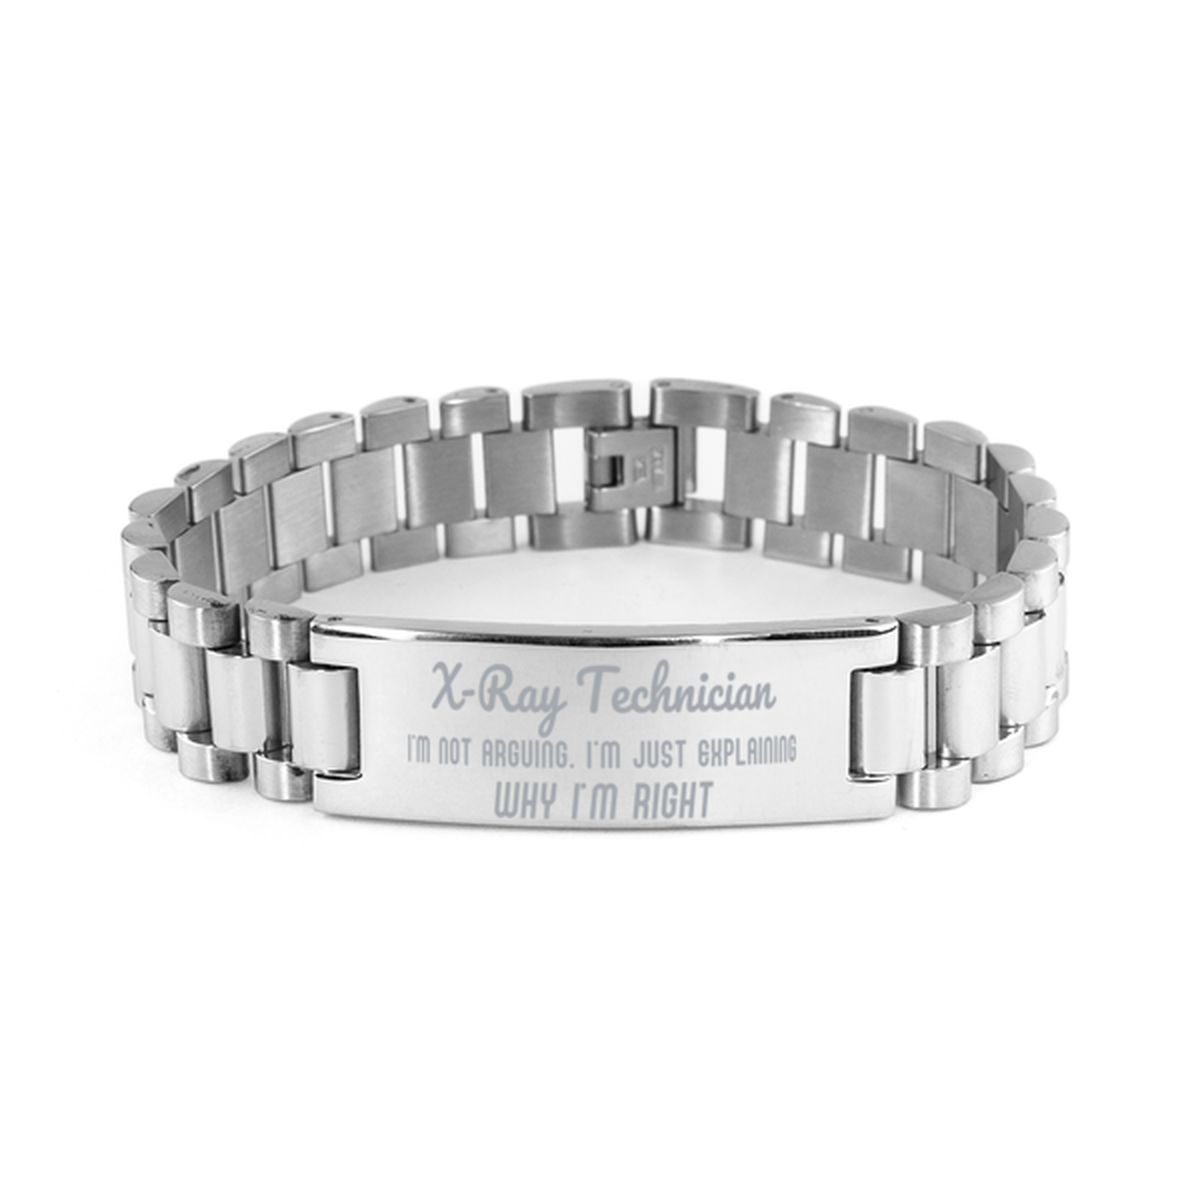 X-Ray Technician I'm not Arguing. I'm Just Explaining Why I'm RIGHT Ladder Stainless Steel Bracelet, Graduation Birthday Christmas X-Ray Technician Gifts For X-Ray Technician Funny Saying Quote Present for Men Women Coworker